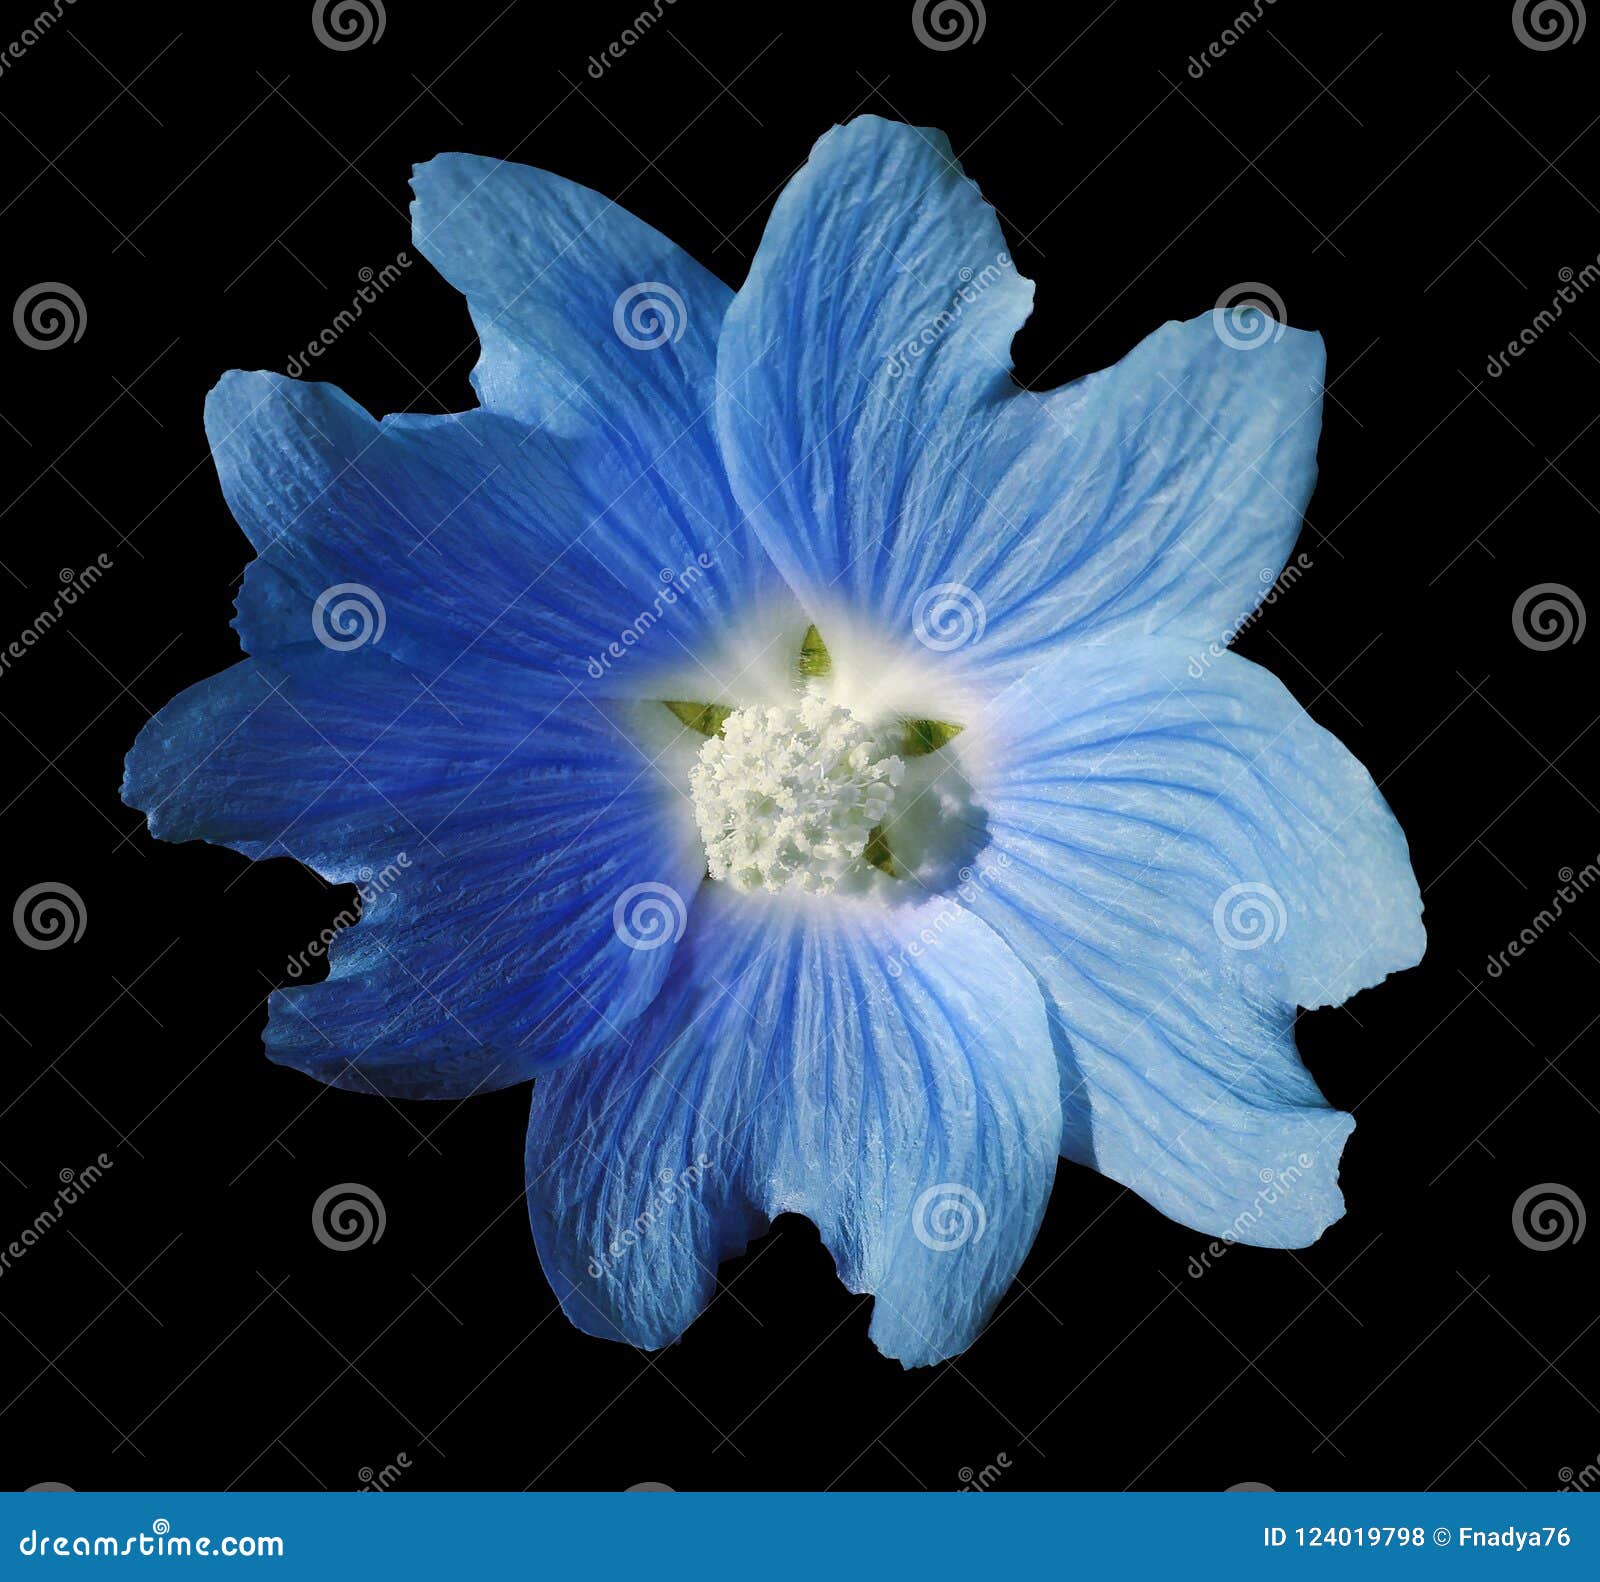 2 717 Blue Mallow Photos Free Royalty Free Stock Photos From Dreamstime